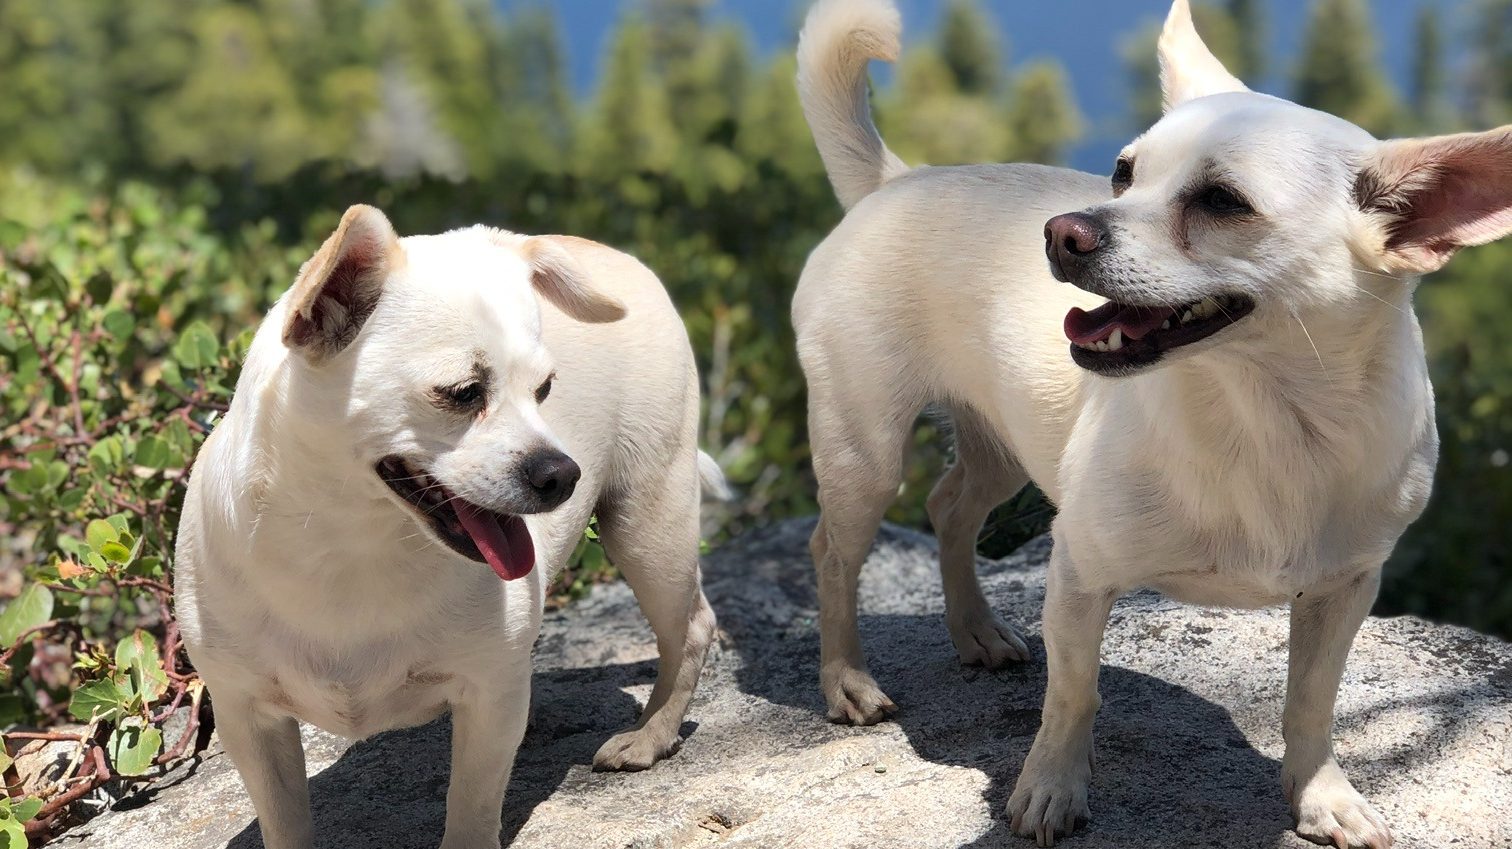 Two small white dogs stand on a rocky ledge, overlooking a scenic lake surrounded by lush greenery in California. The dog on the left pants with its tongue out, while the dog on the right gazes ahead. Both appear content and relaxed in the sunlight—an ideal image for a DogTrekker photo contest.